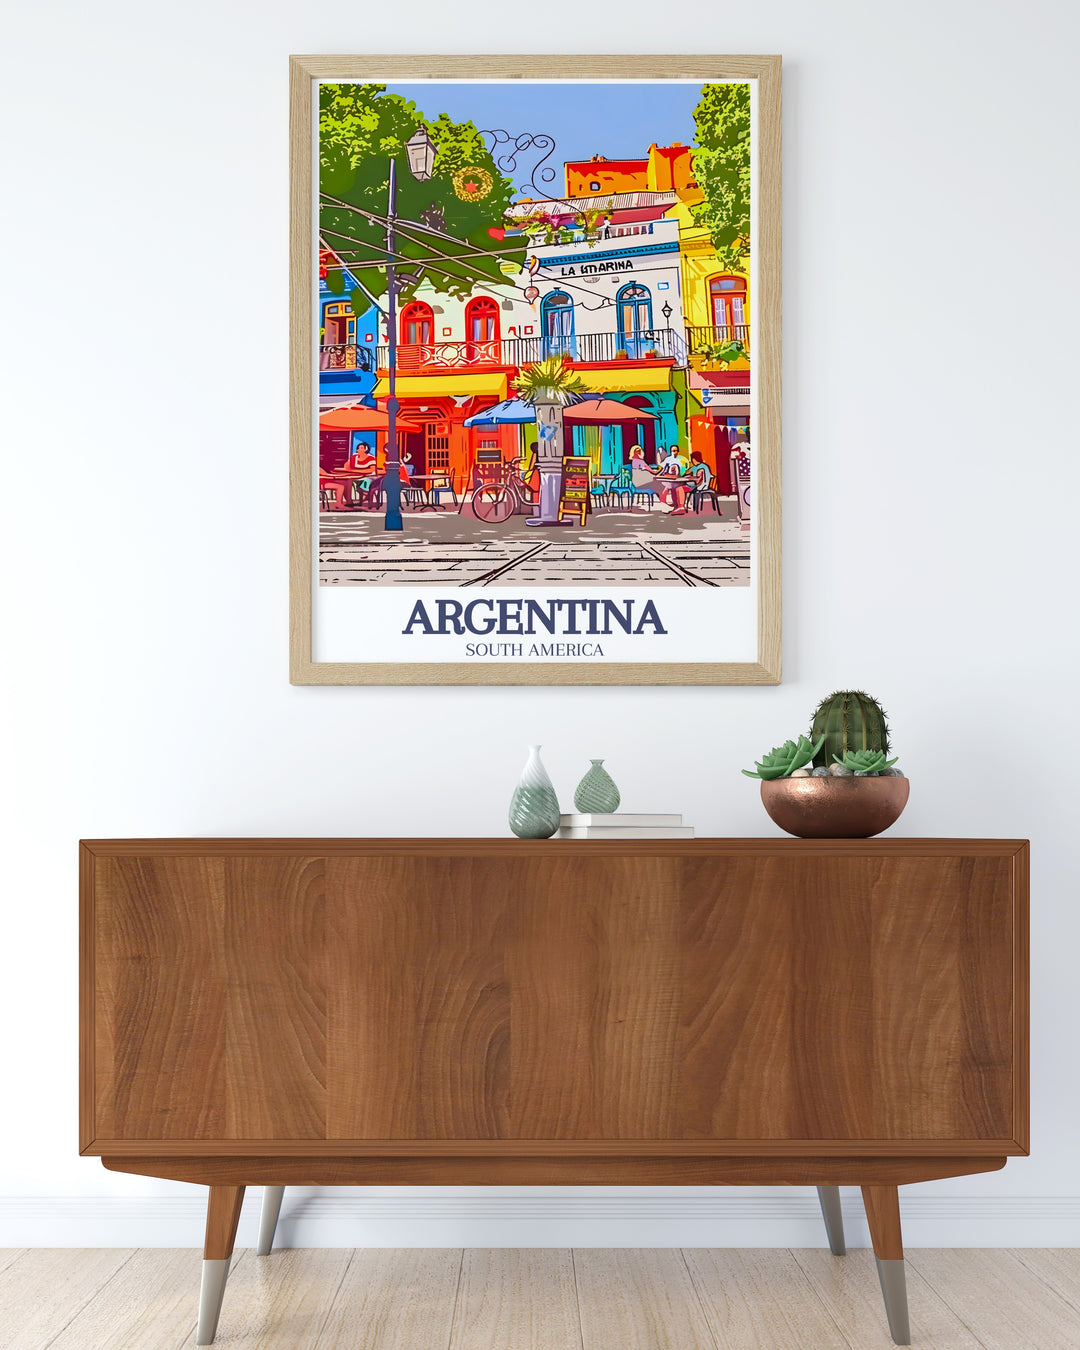 Bright and colorful Buenos Aires, La Boca wall art depicting the vibrant life and culture of this iconic Buenos Aires neighborhood. This Argentina print is perfect for anyone looking to add a touch of South American charm to their decor.